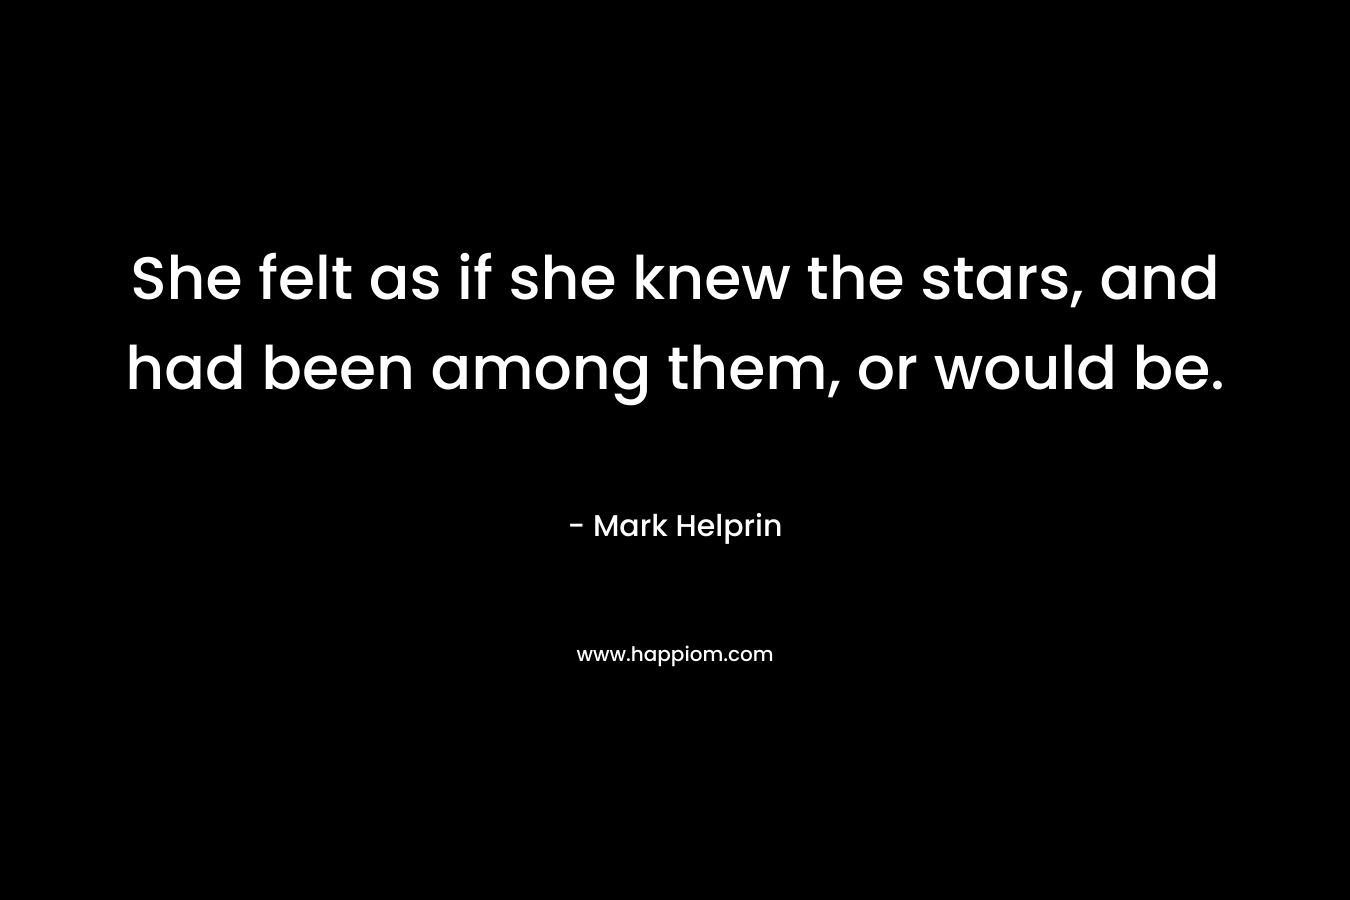 She felt as if she knew the stars, and had been among them, or would be. – Mark Helprin